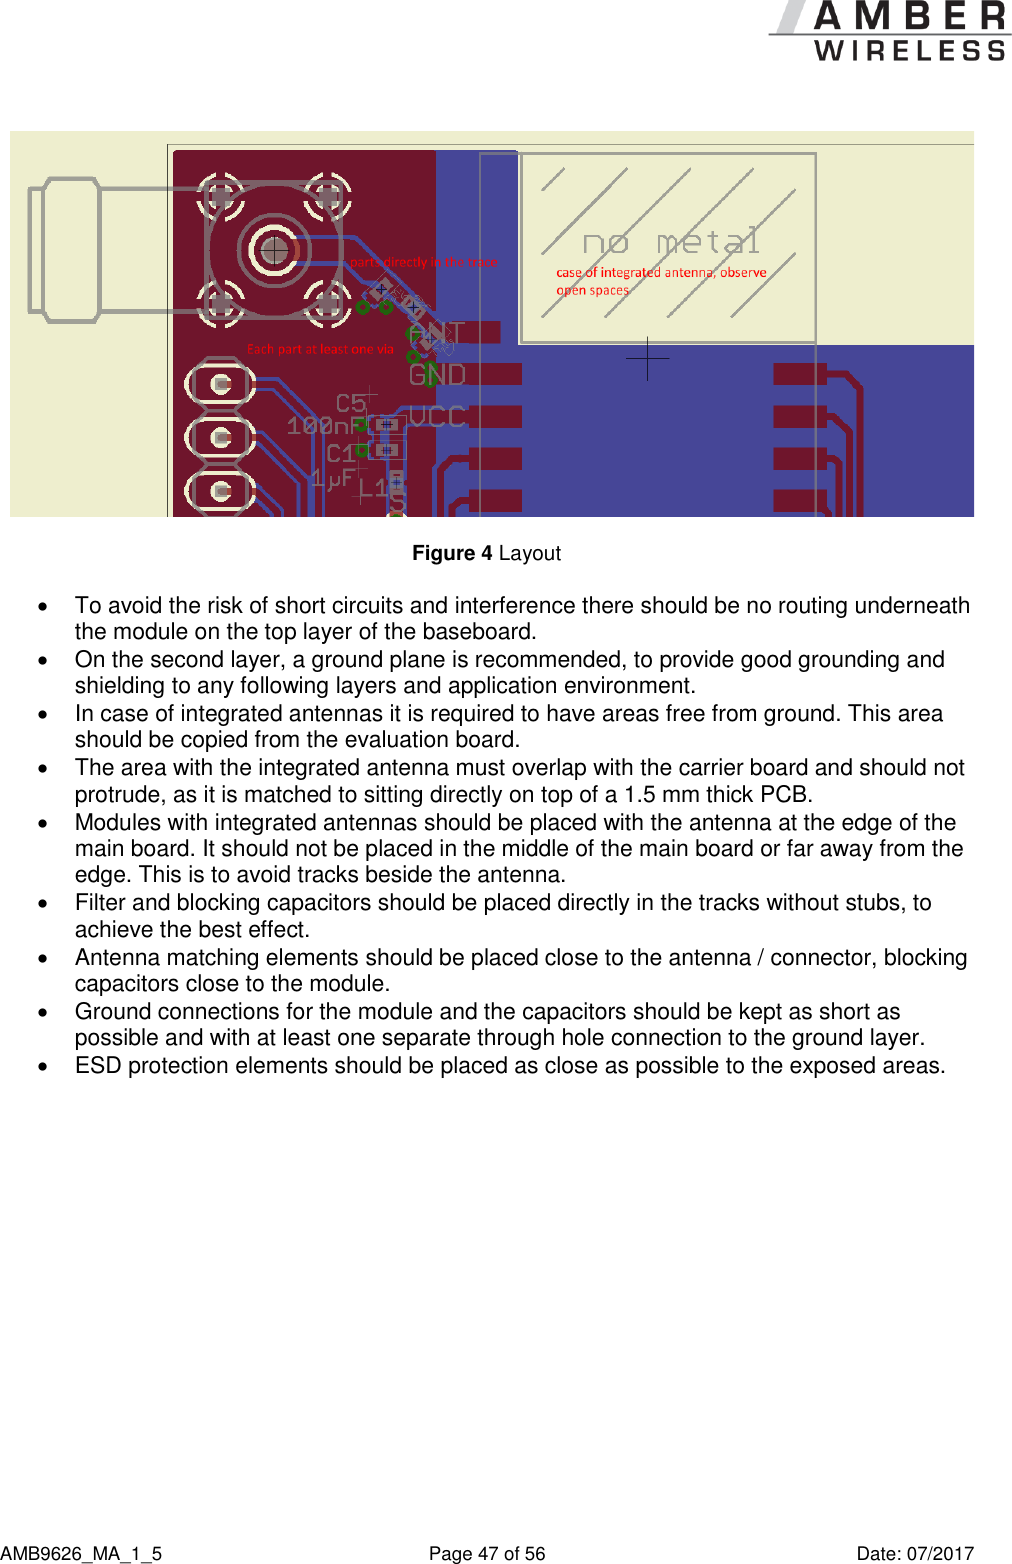      AMB9626_MA_1_5  Page 47 of 56  Date: 07/2017  Figure 4 Layout   To avoid the risk of short circuits and interference there should be no routing underneath the module on the top layer of the baseboard.   On the second layer, a ground plane is recommended, to provide good grounding and shielding to any following layers and application environment.    In case of integrated antennas it is required to have areas free from ground. This area should be copied from the evaluation board.   The area with the integrated antenna must overlap with the carrier board and should not protrude, as it is matched to sitting directly on top of a 1.5 mm thick PCB.   Modules with integrated antennas should be placed with the antenna at the edge of the main board. It should not be placed in the middle of the main board or far away from the edge. This is to avoid tracks beside the antenna.   Filter and blocking capacitors should be placed directly in the tracks without stubs, to achieve the best effect.   Antenna matching elements should be placed close to the antenna / connector, blocking capacitors close to the module.   Ground connections for the module and the capacitors should be kept as short as possible and with at least one separate through hole connection to the ground layer.   ESD protection elements should be placed as close as possible to the exposed areas.  